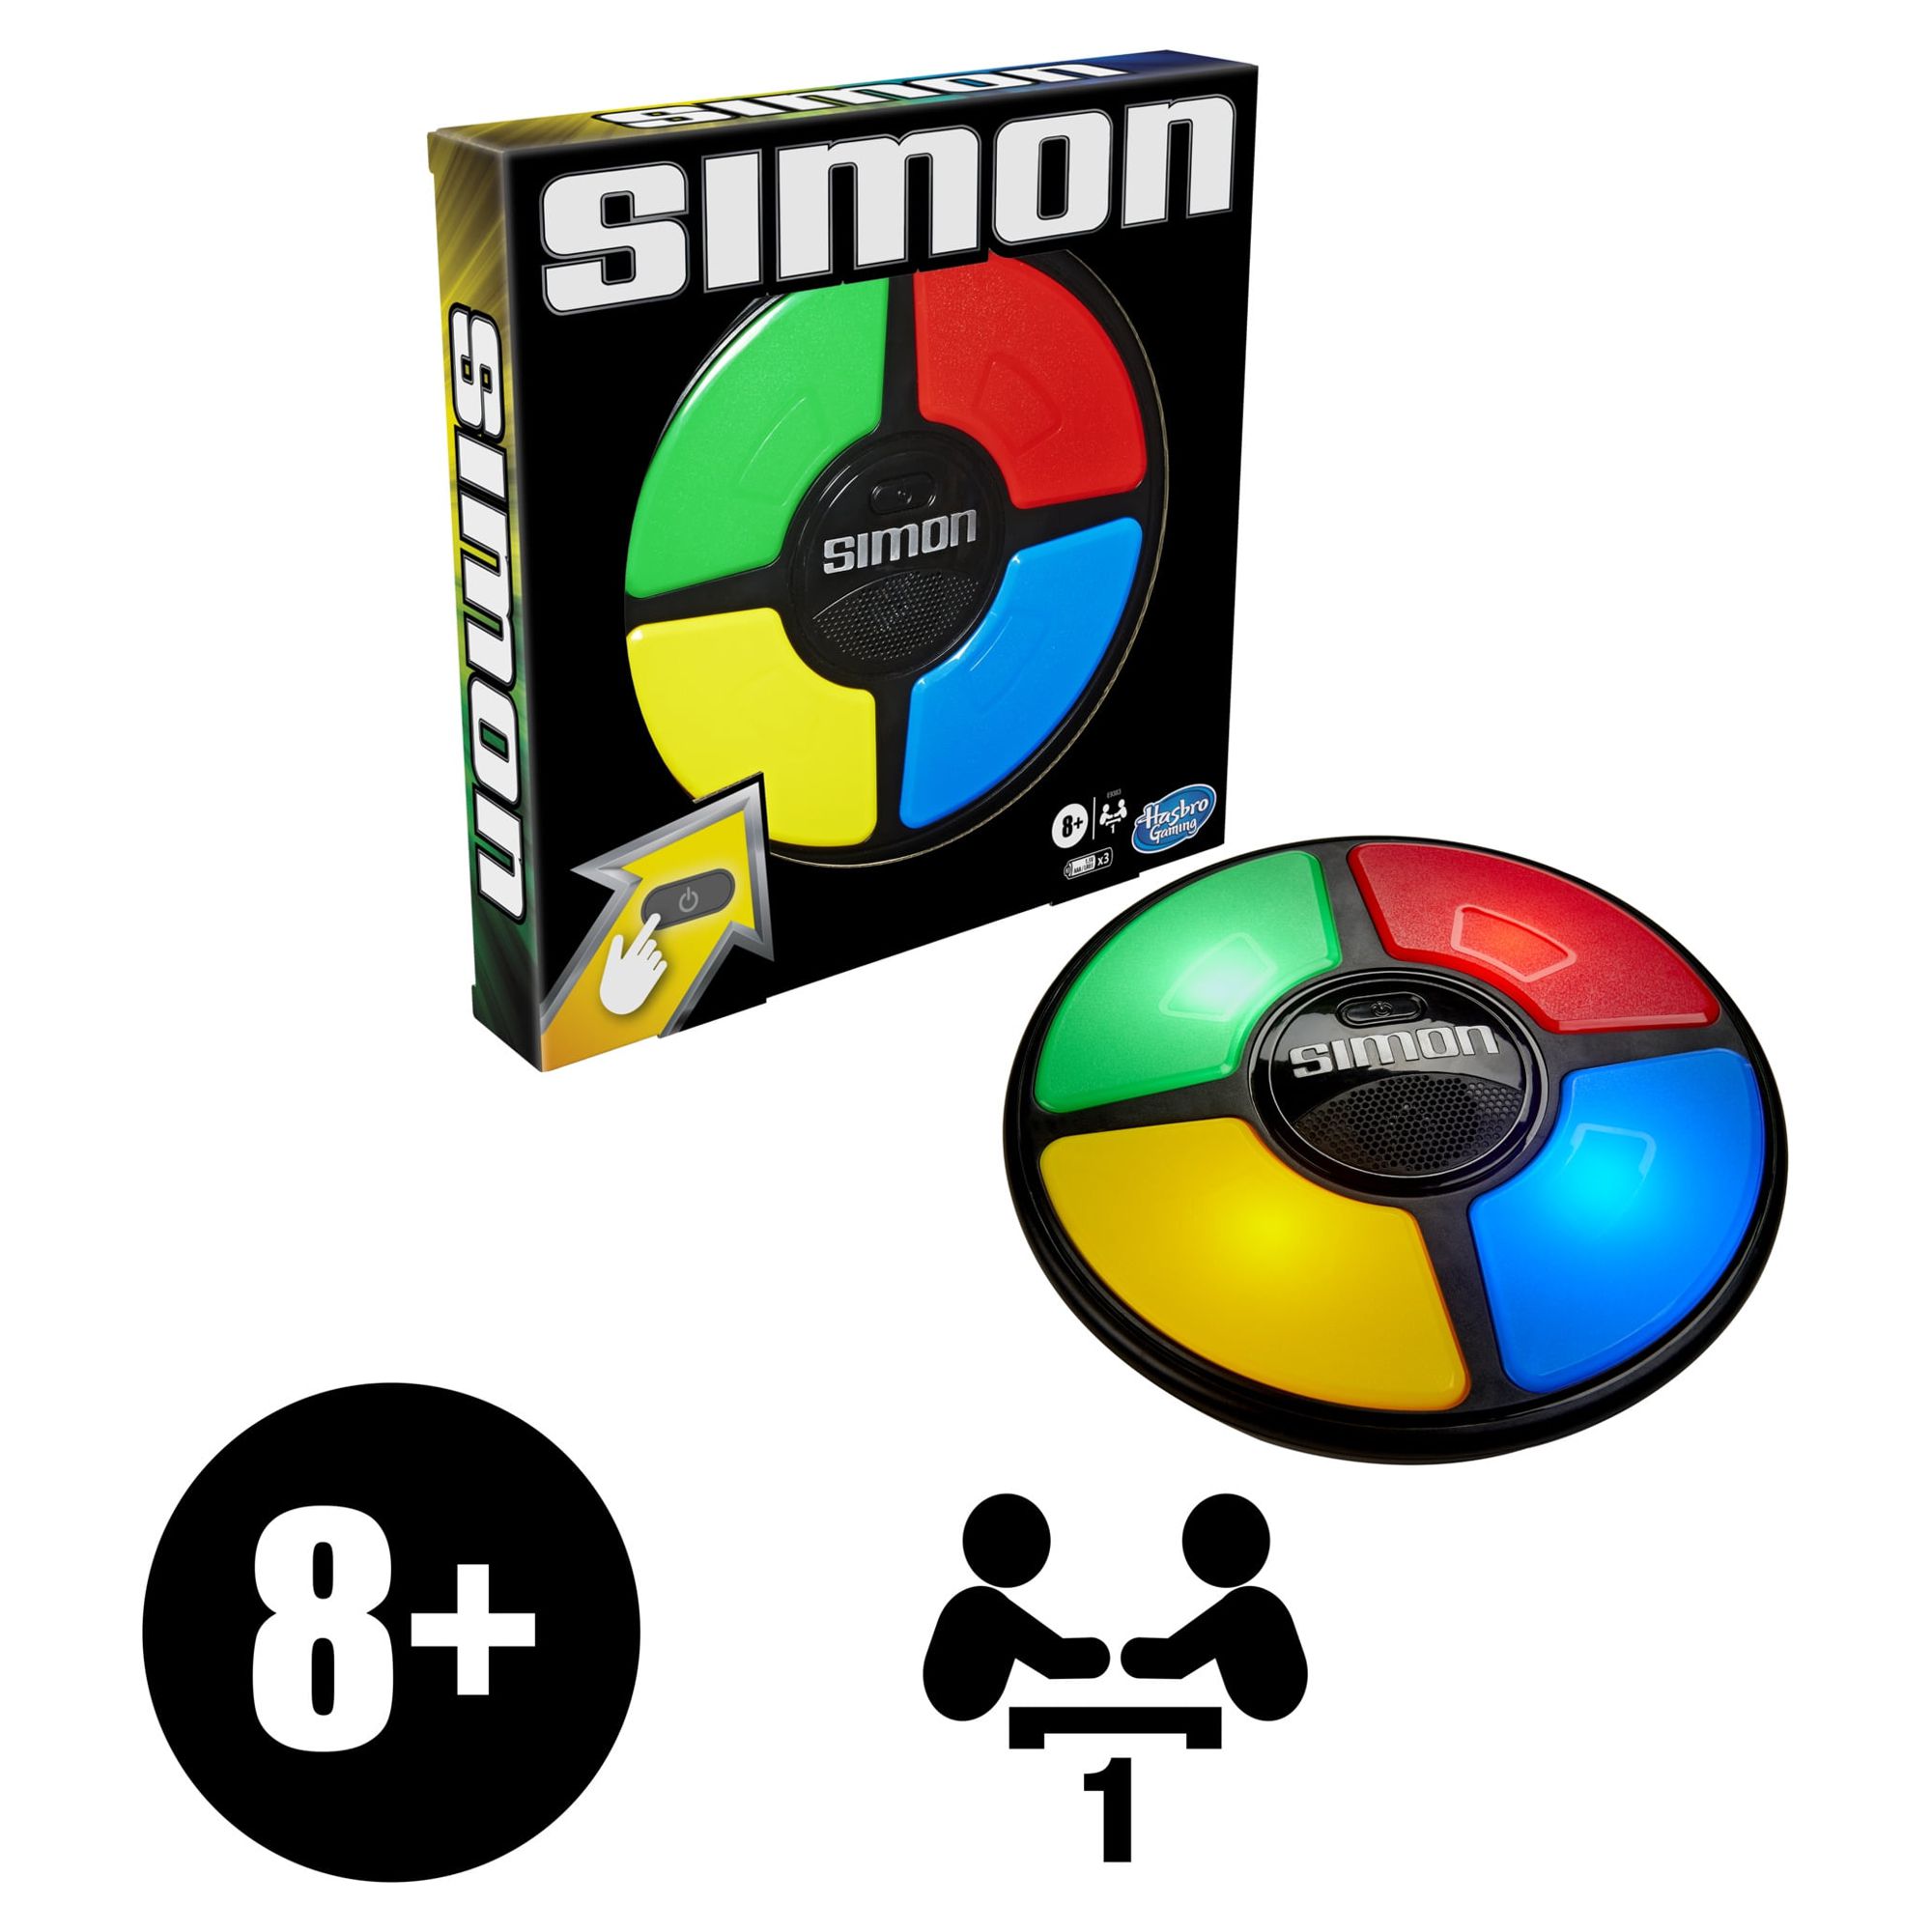 Simon Electronic Memory Board Game for Kids and Family Ages 8 and up, 1 Player - image 3 of 9